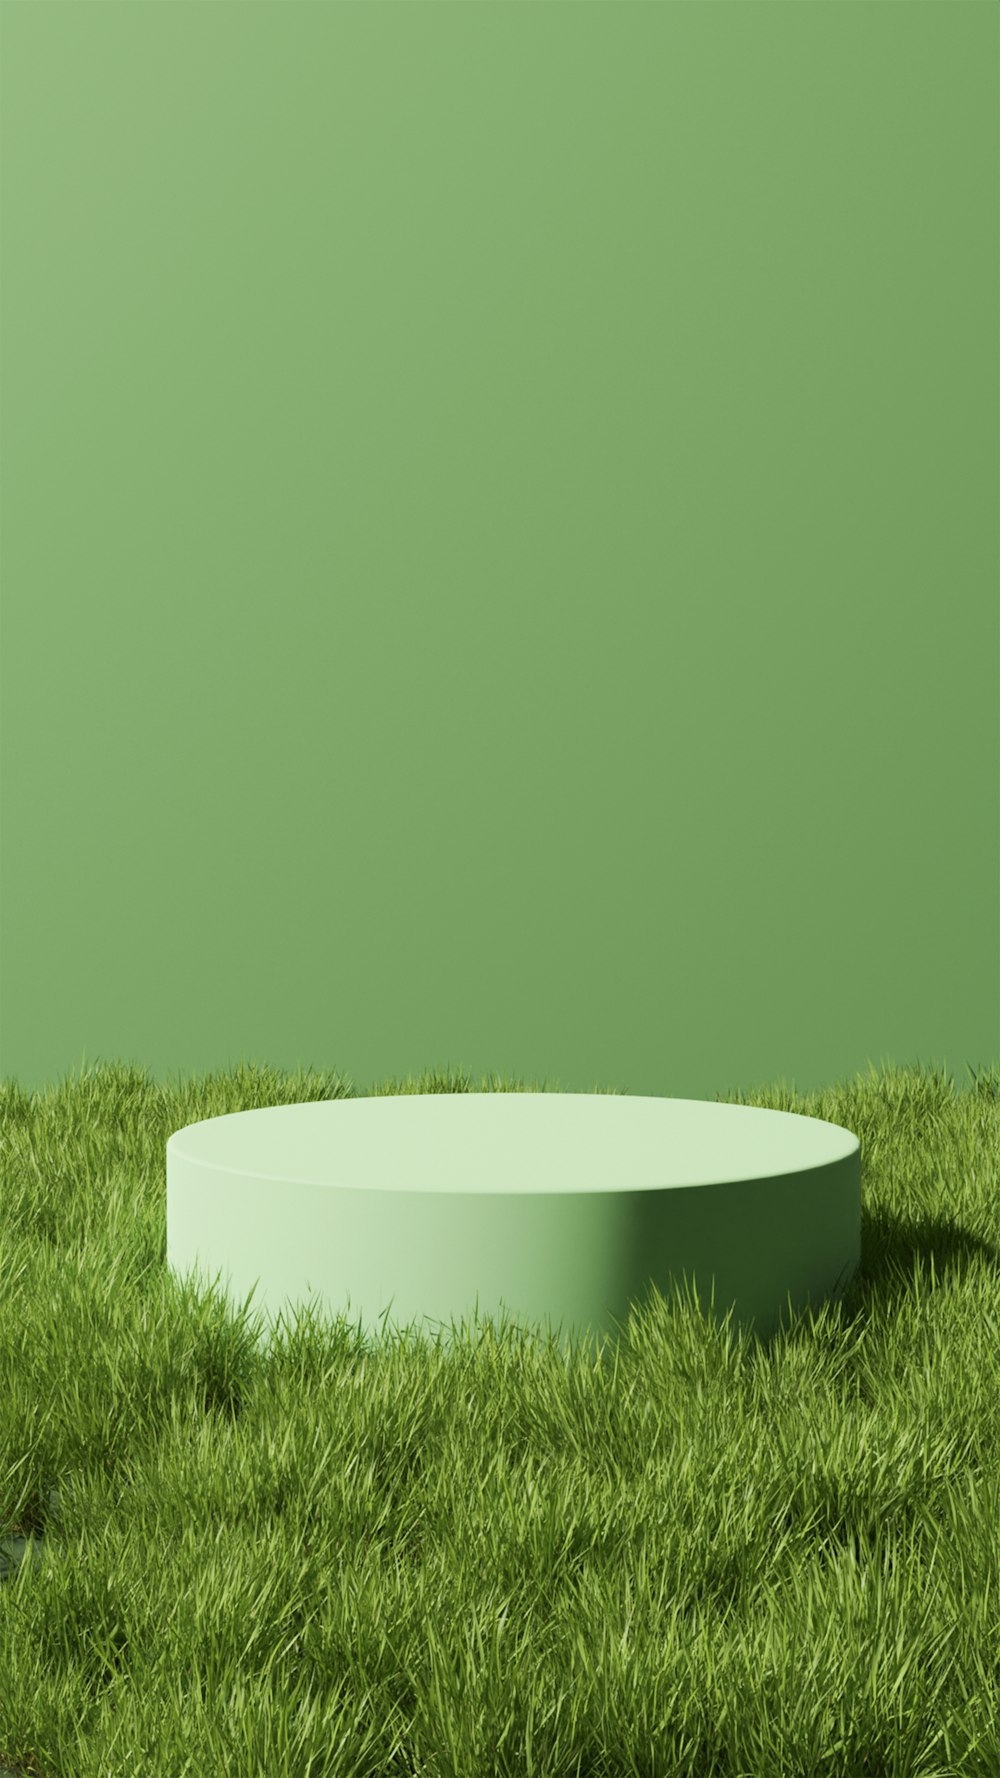 a round object sitting in the middle of some grass